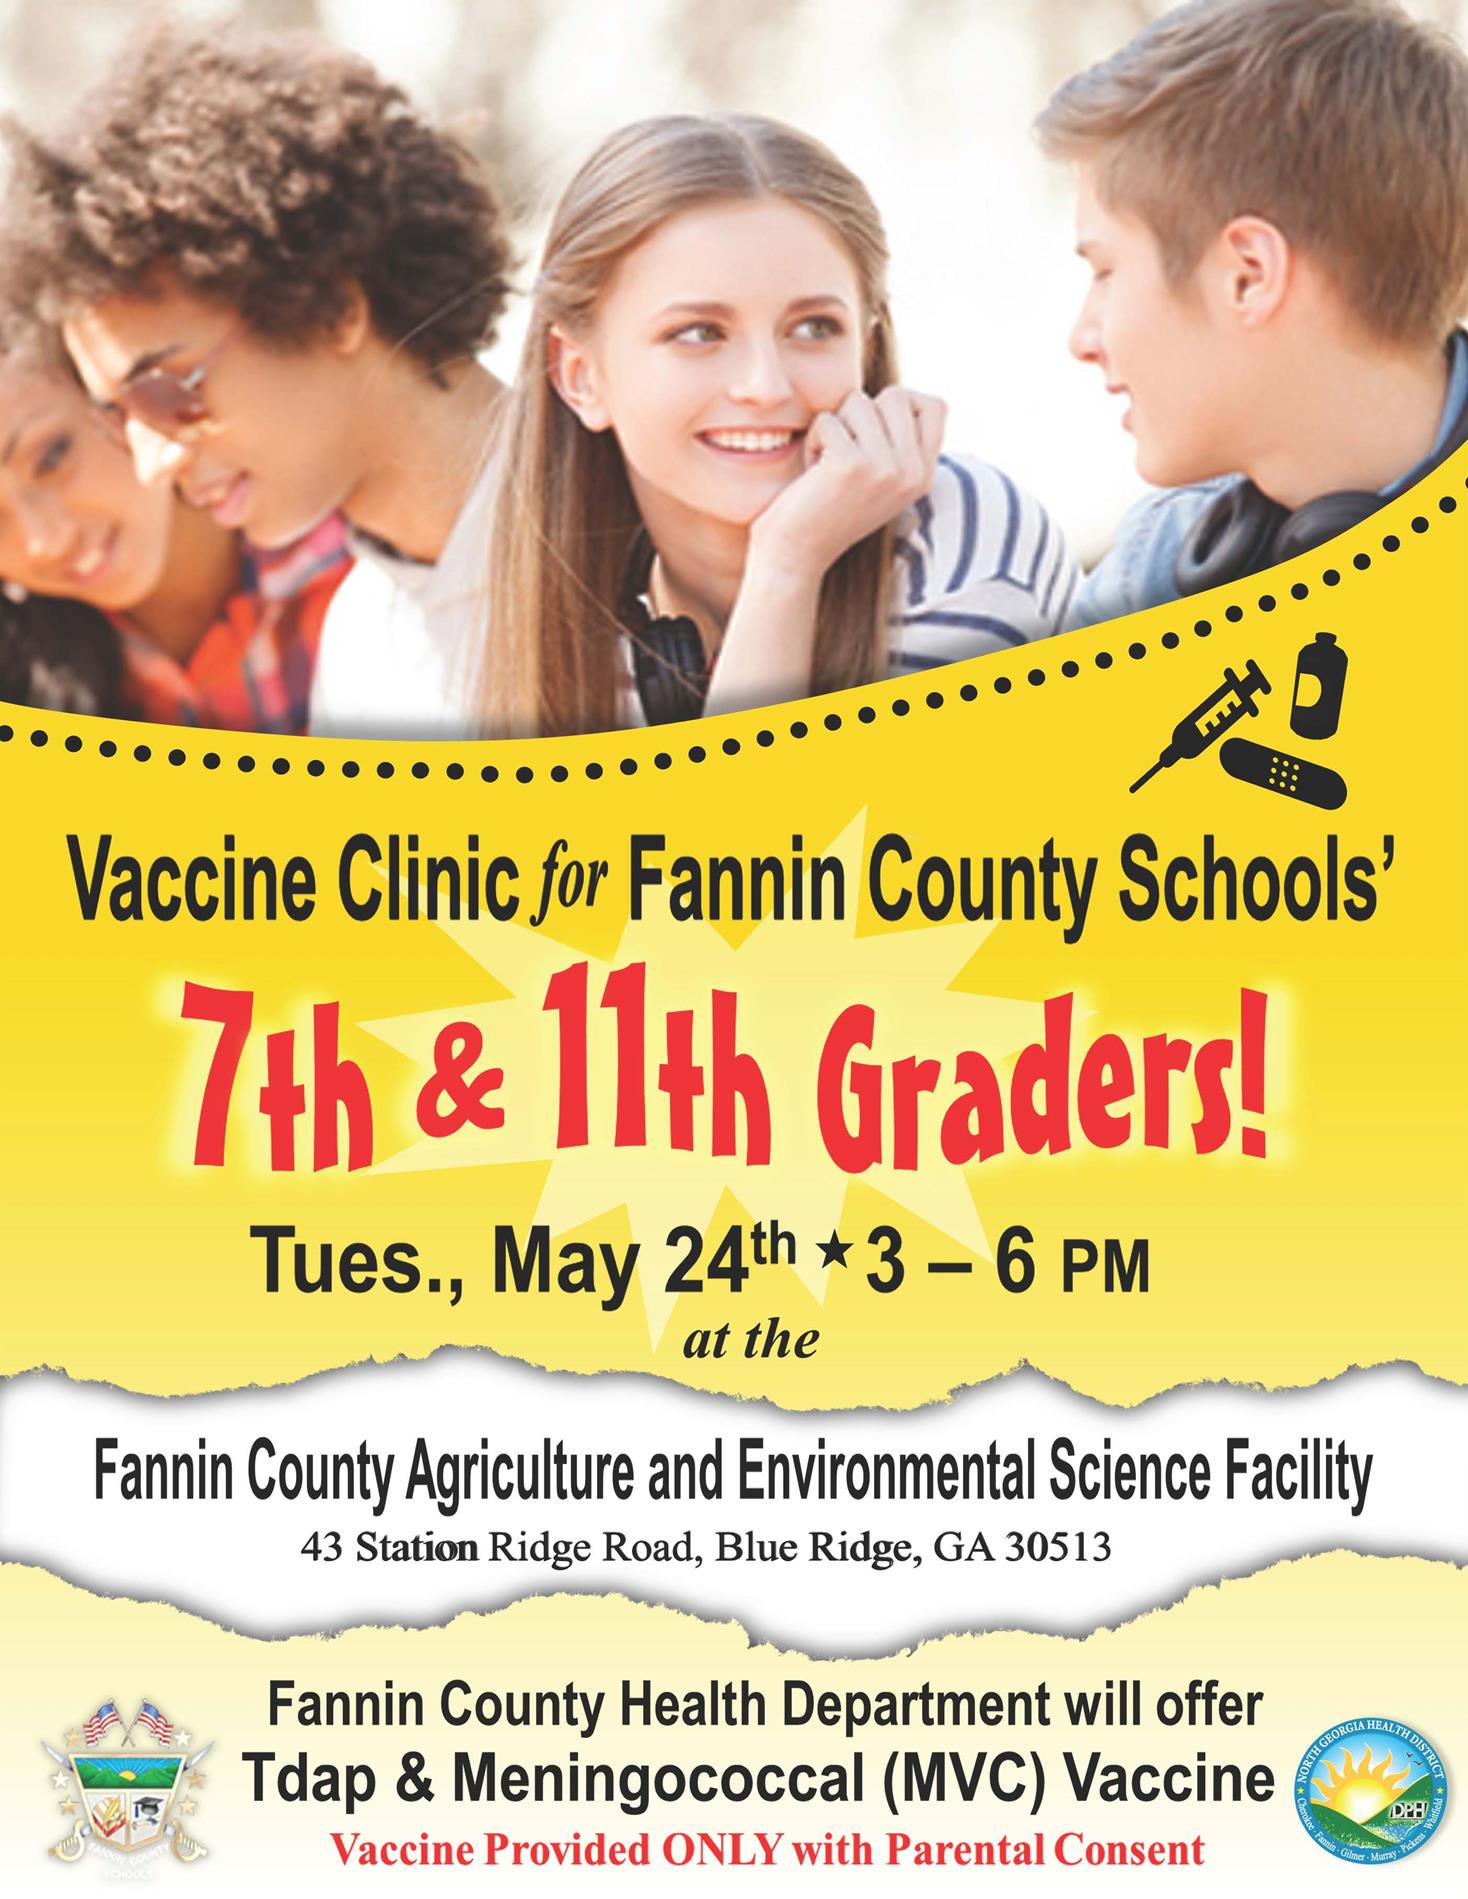 Vaccine Clinic for 7th & 11th Graders